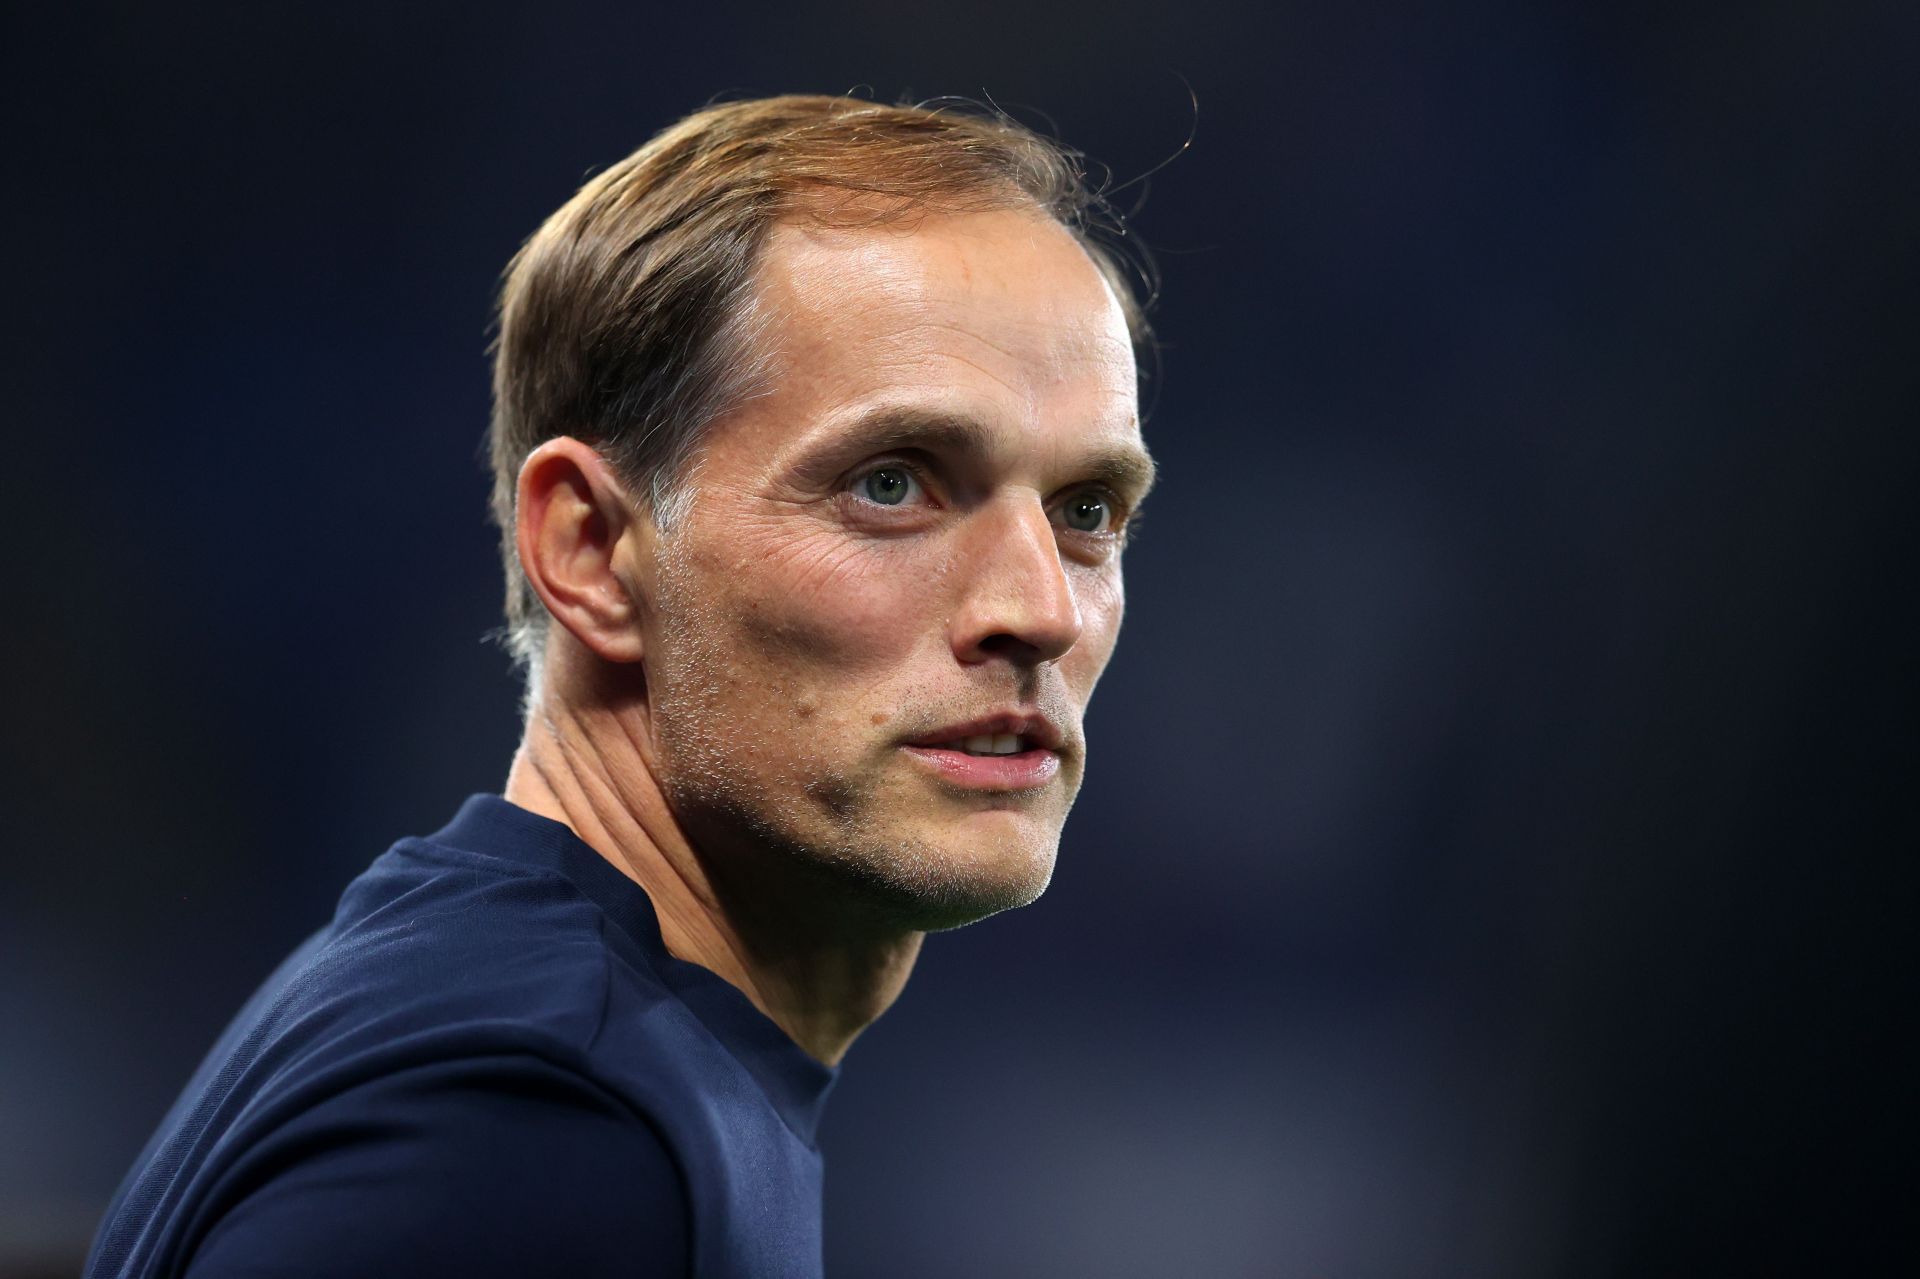 Chelsea manager Thomas Tuchel has an impeccable defensive record this season.